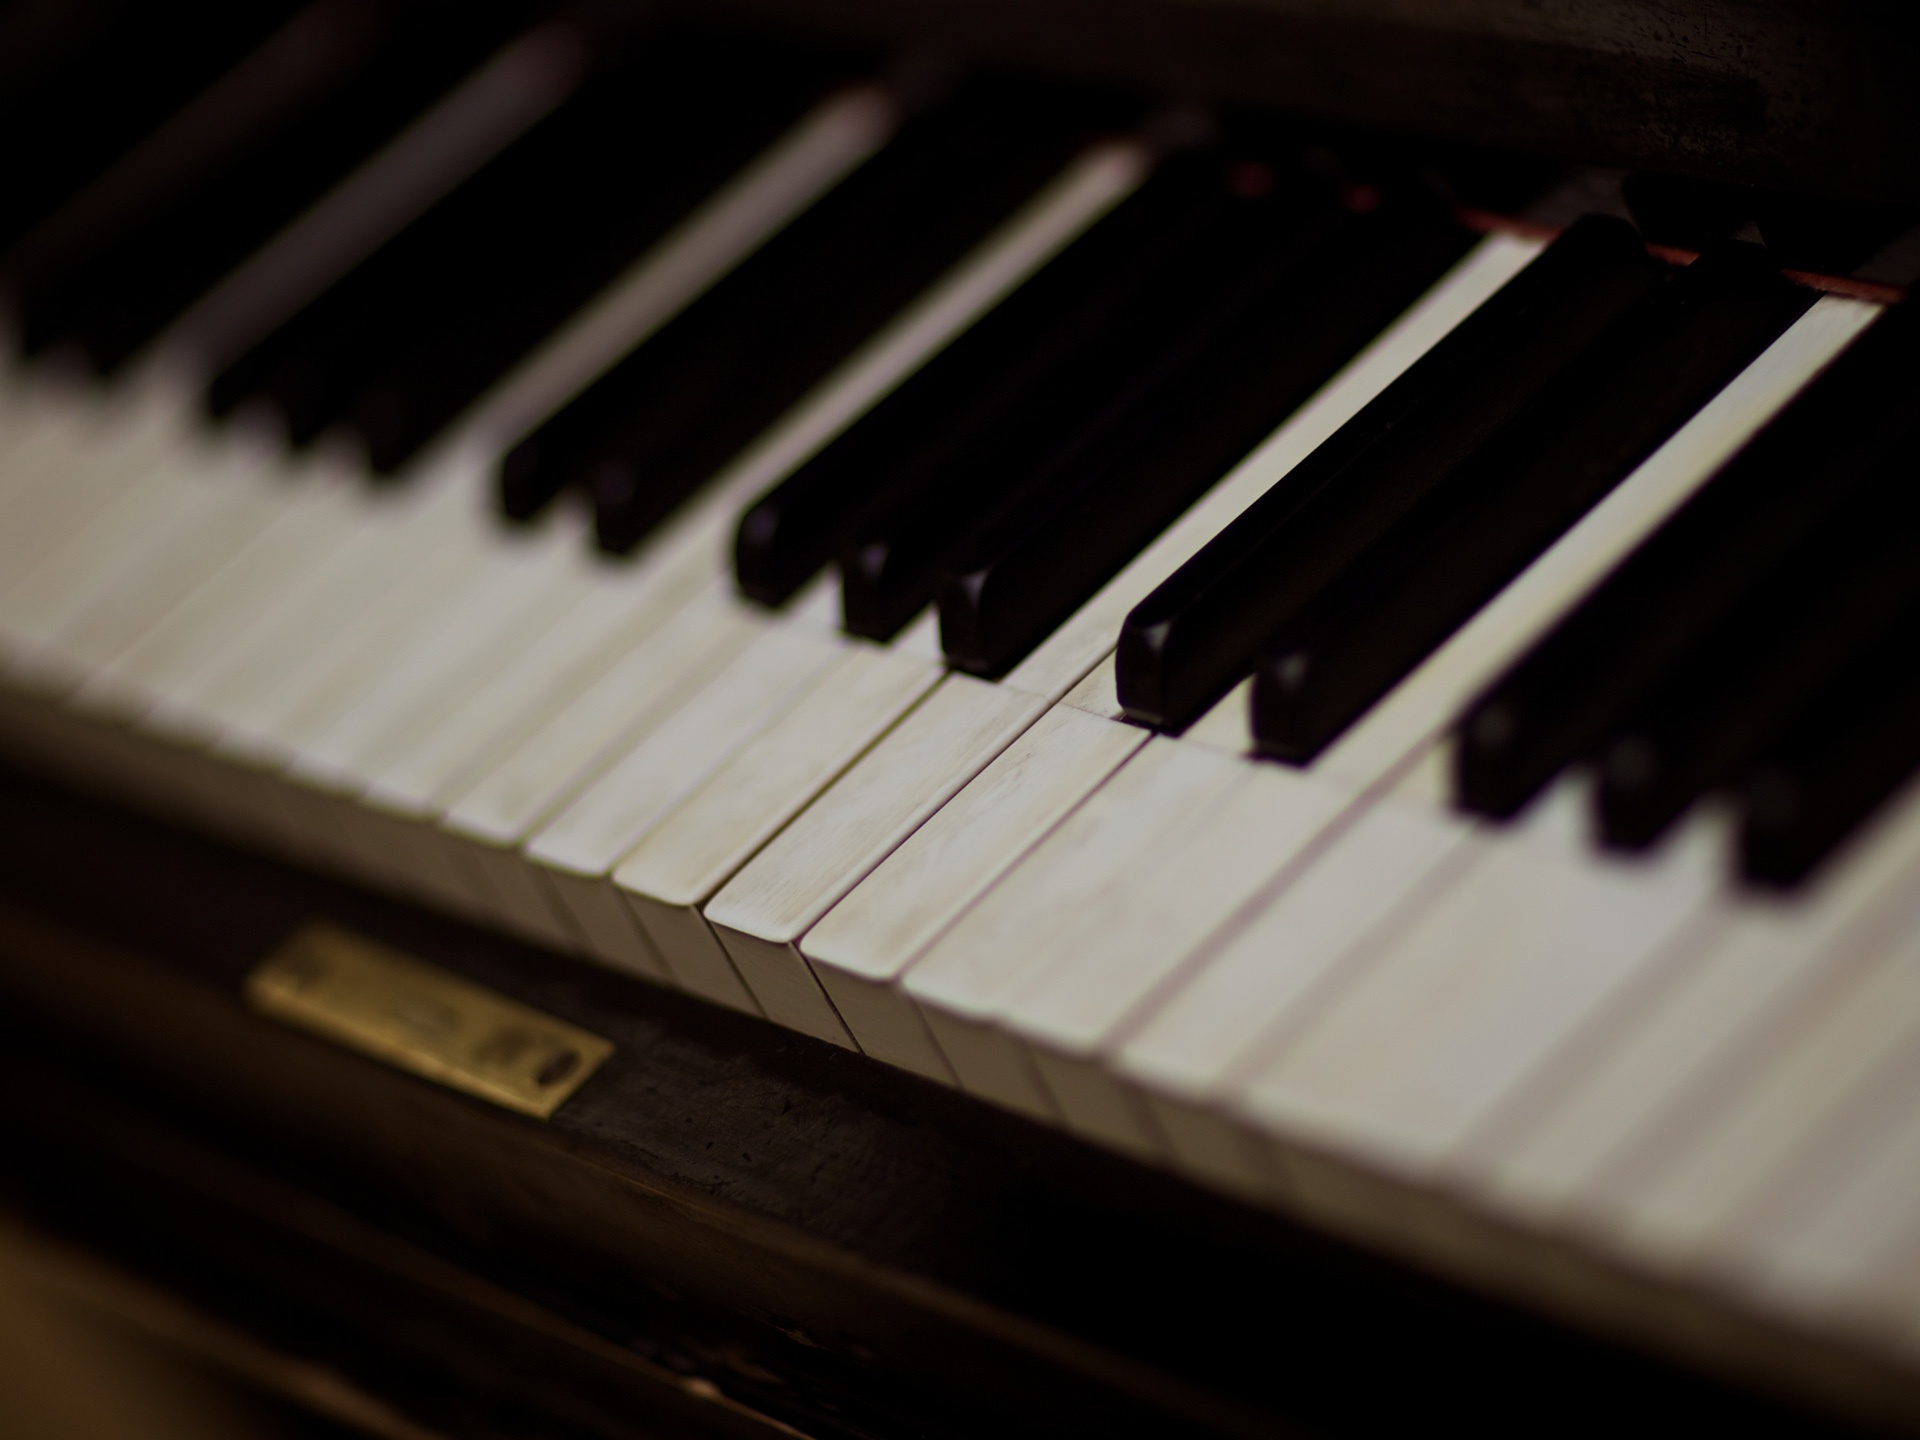 Piano 1920x1440 wallpaper download page 306051